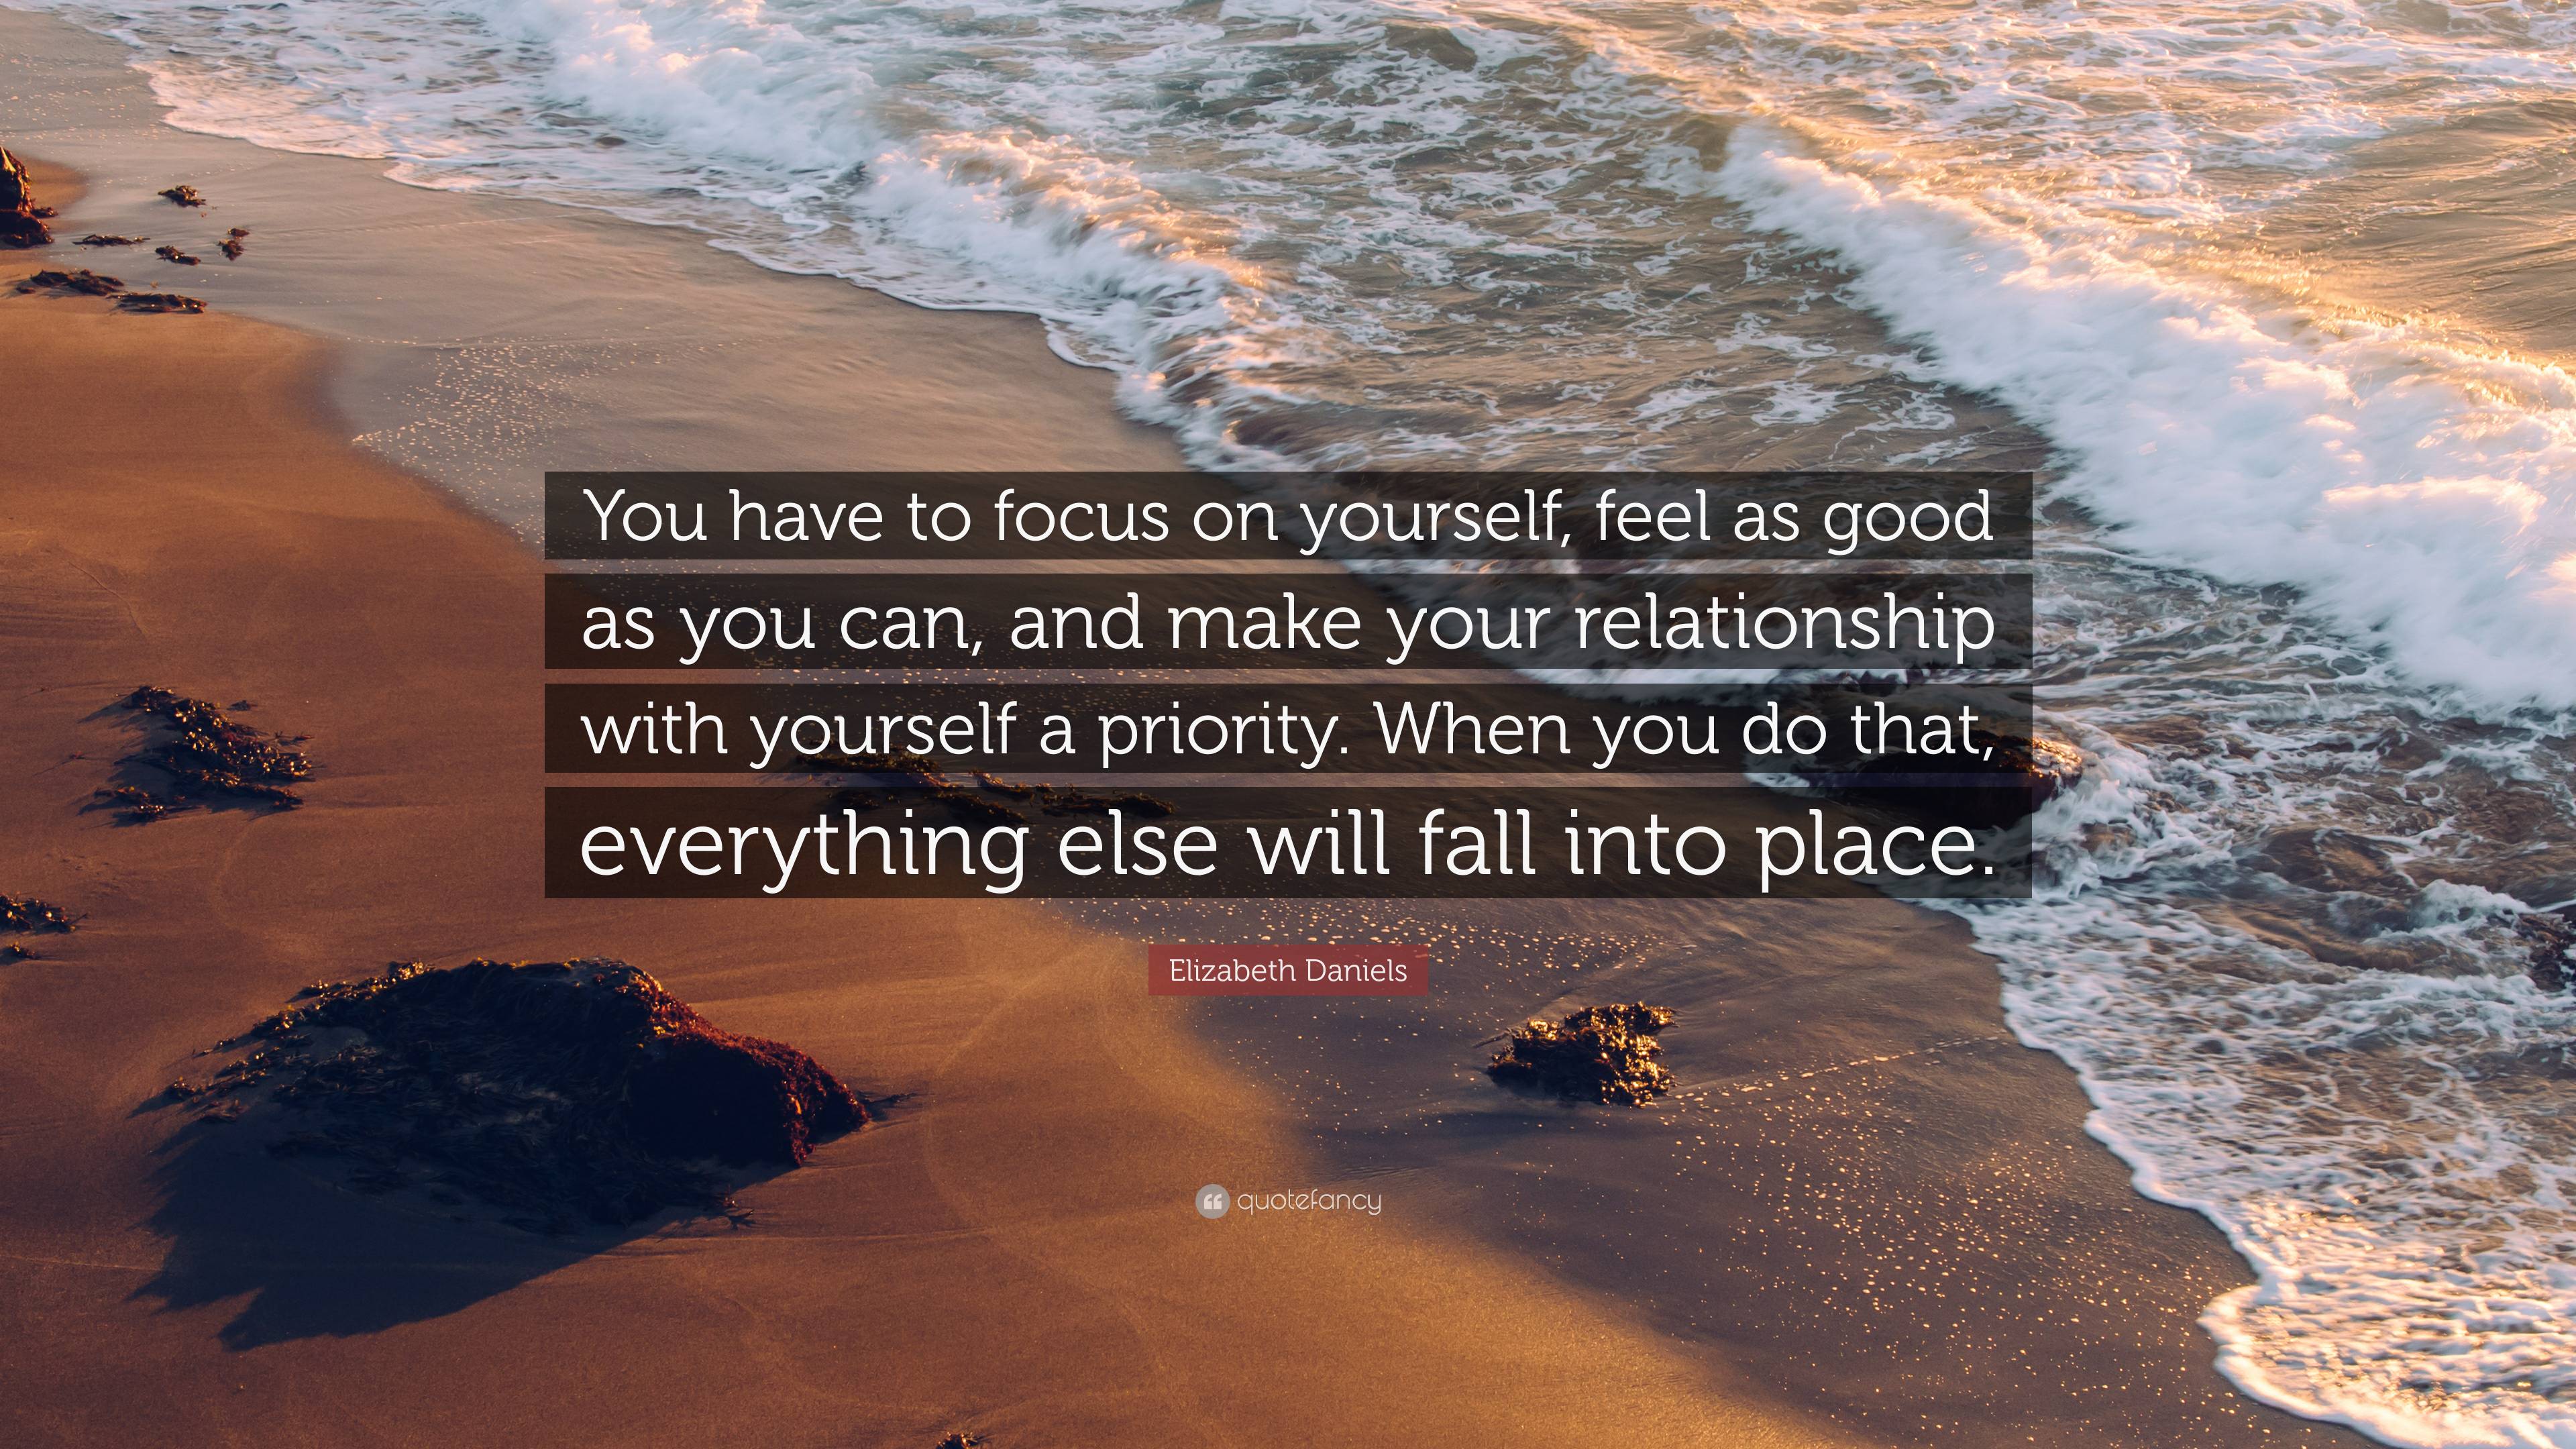 Elizabeth Daniels Quote: “You have to focus on yourself, feel as good as you can, and make your relationship with yourself a priority. When you do.”